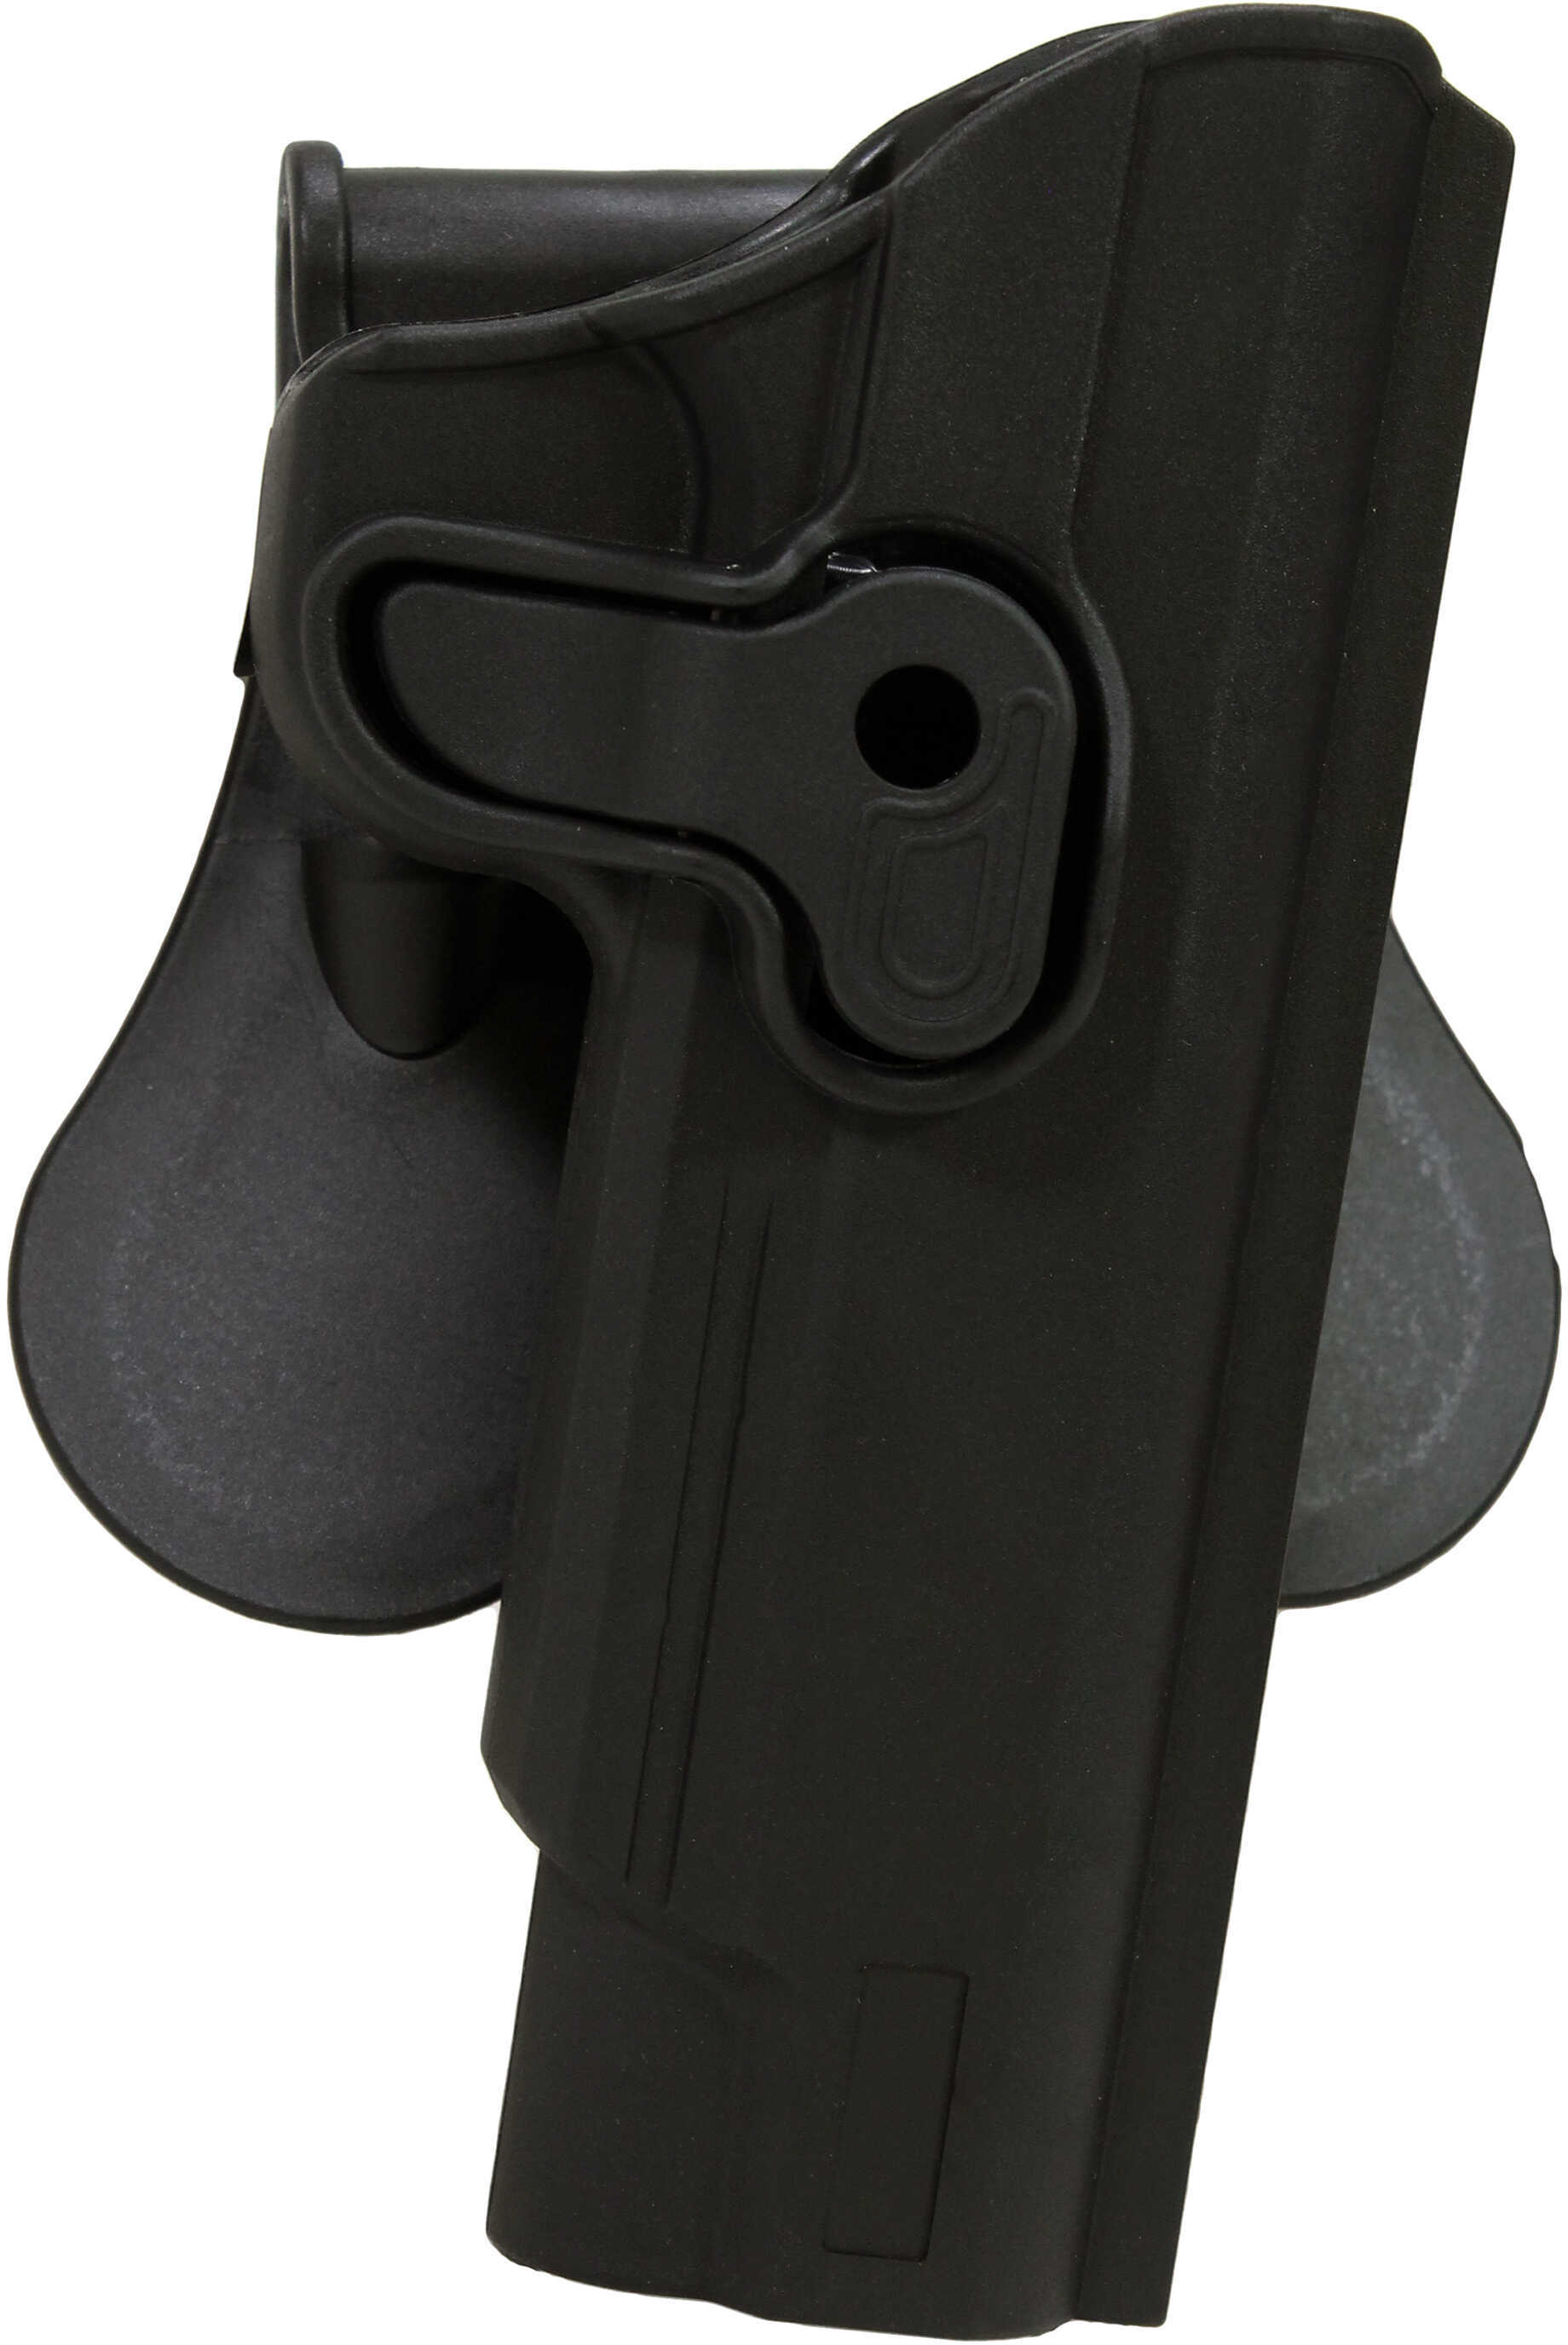 Bulldog Rapid Release Polymer Holster w/Paddle-RH Fits Standard 1911 Style Autos